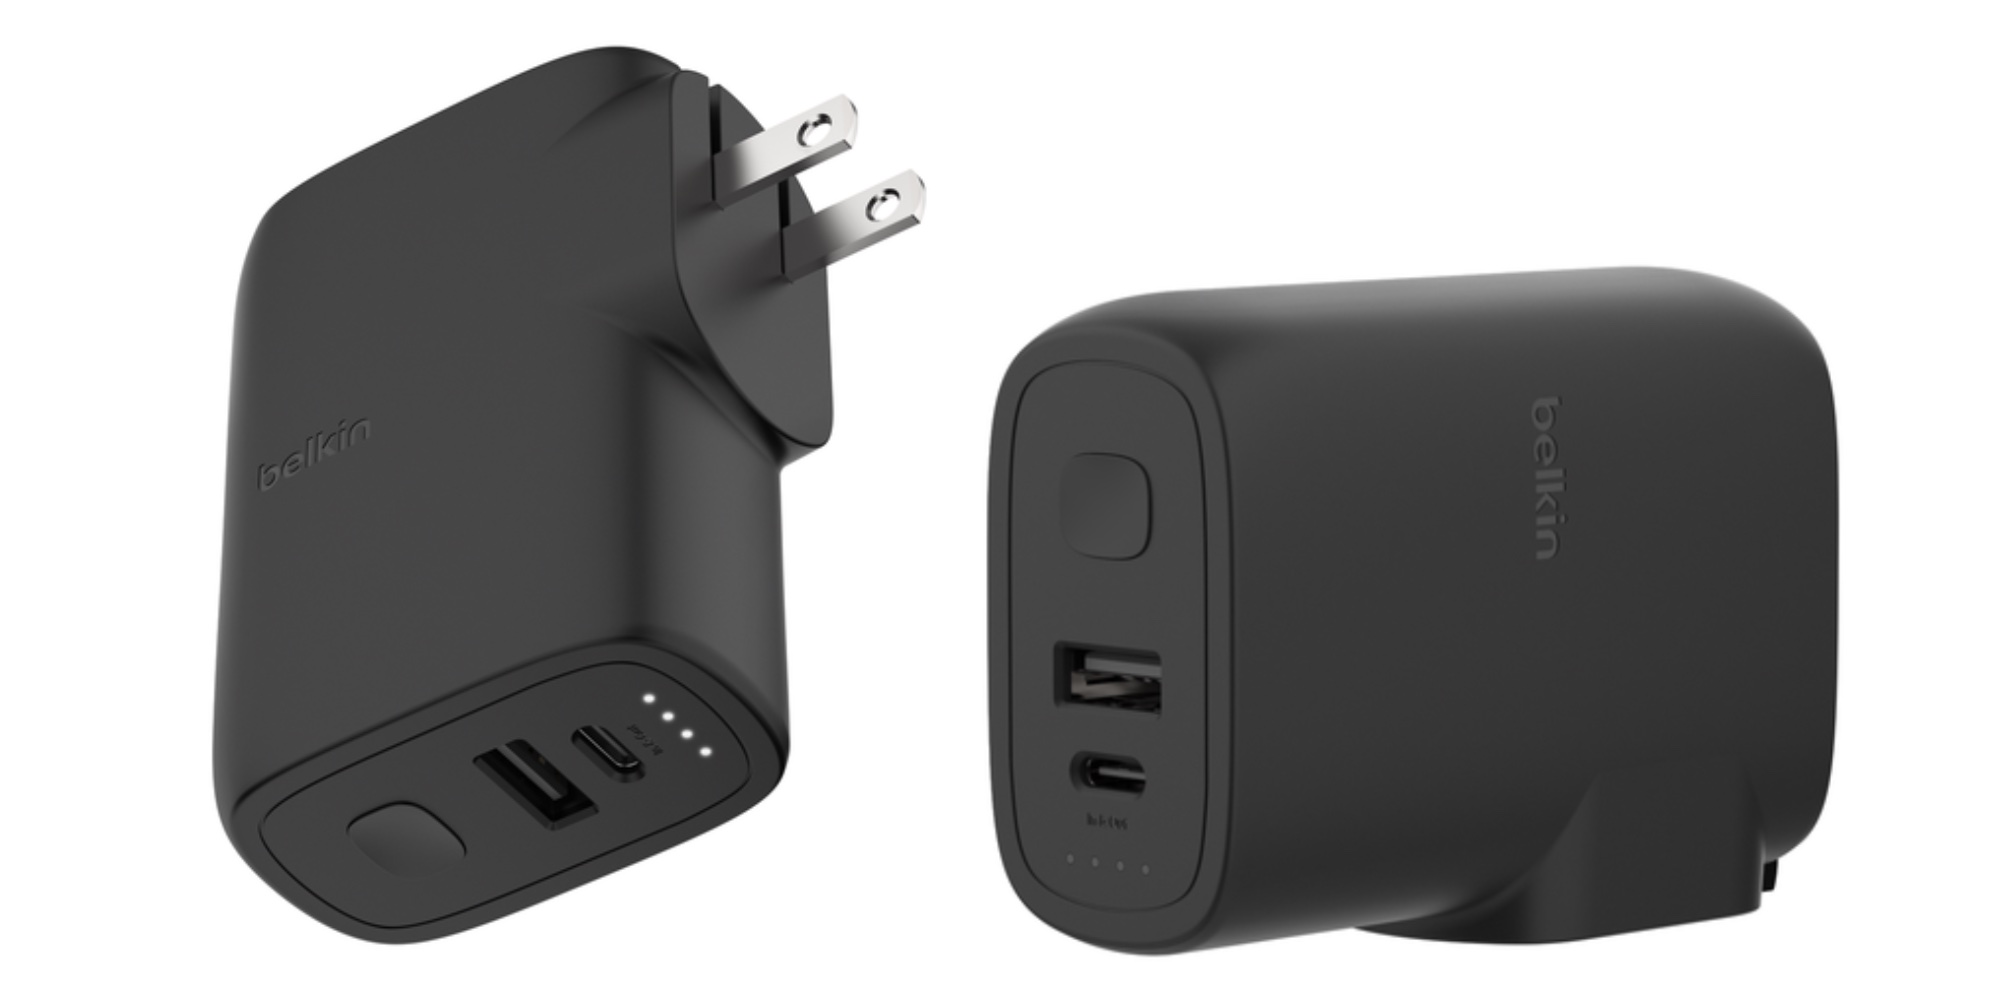 Belkin Launches New Boost Charge Pro Dual USB-C Power Adapters